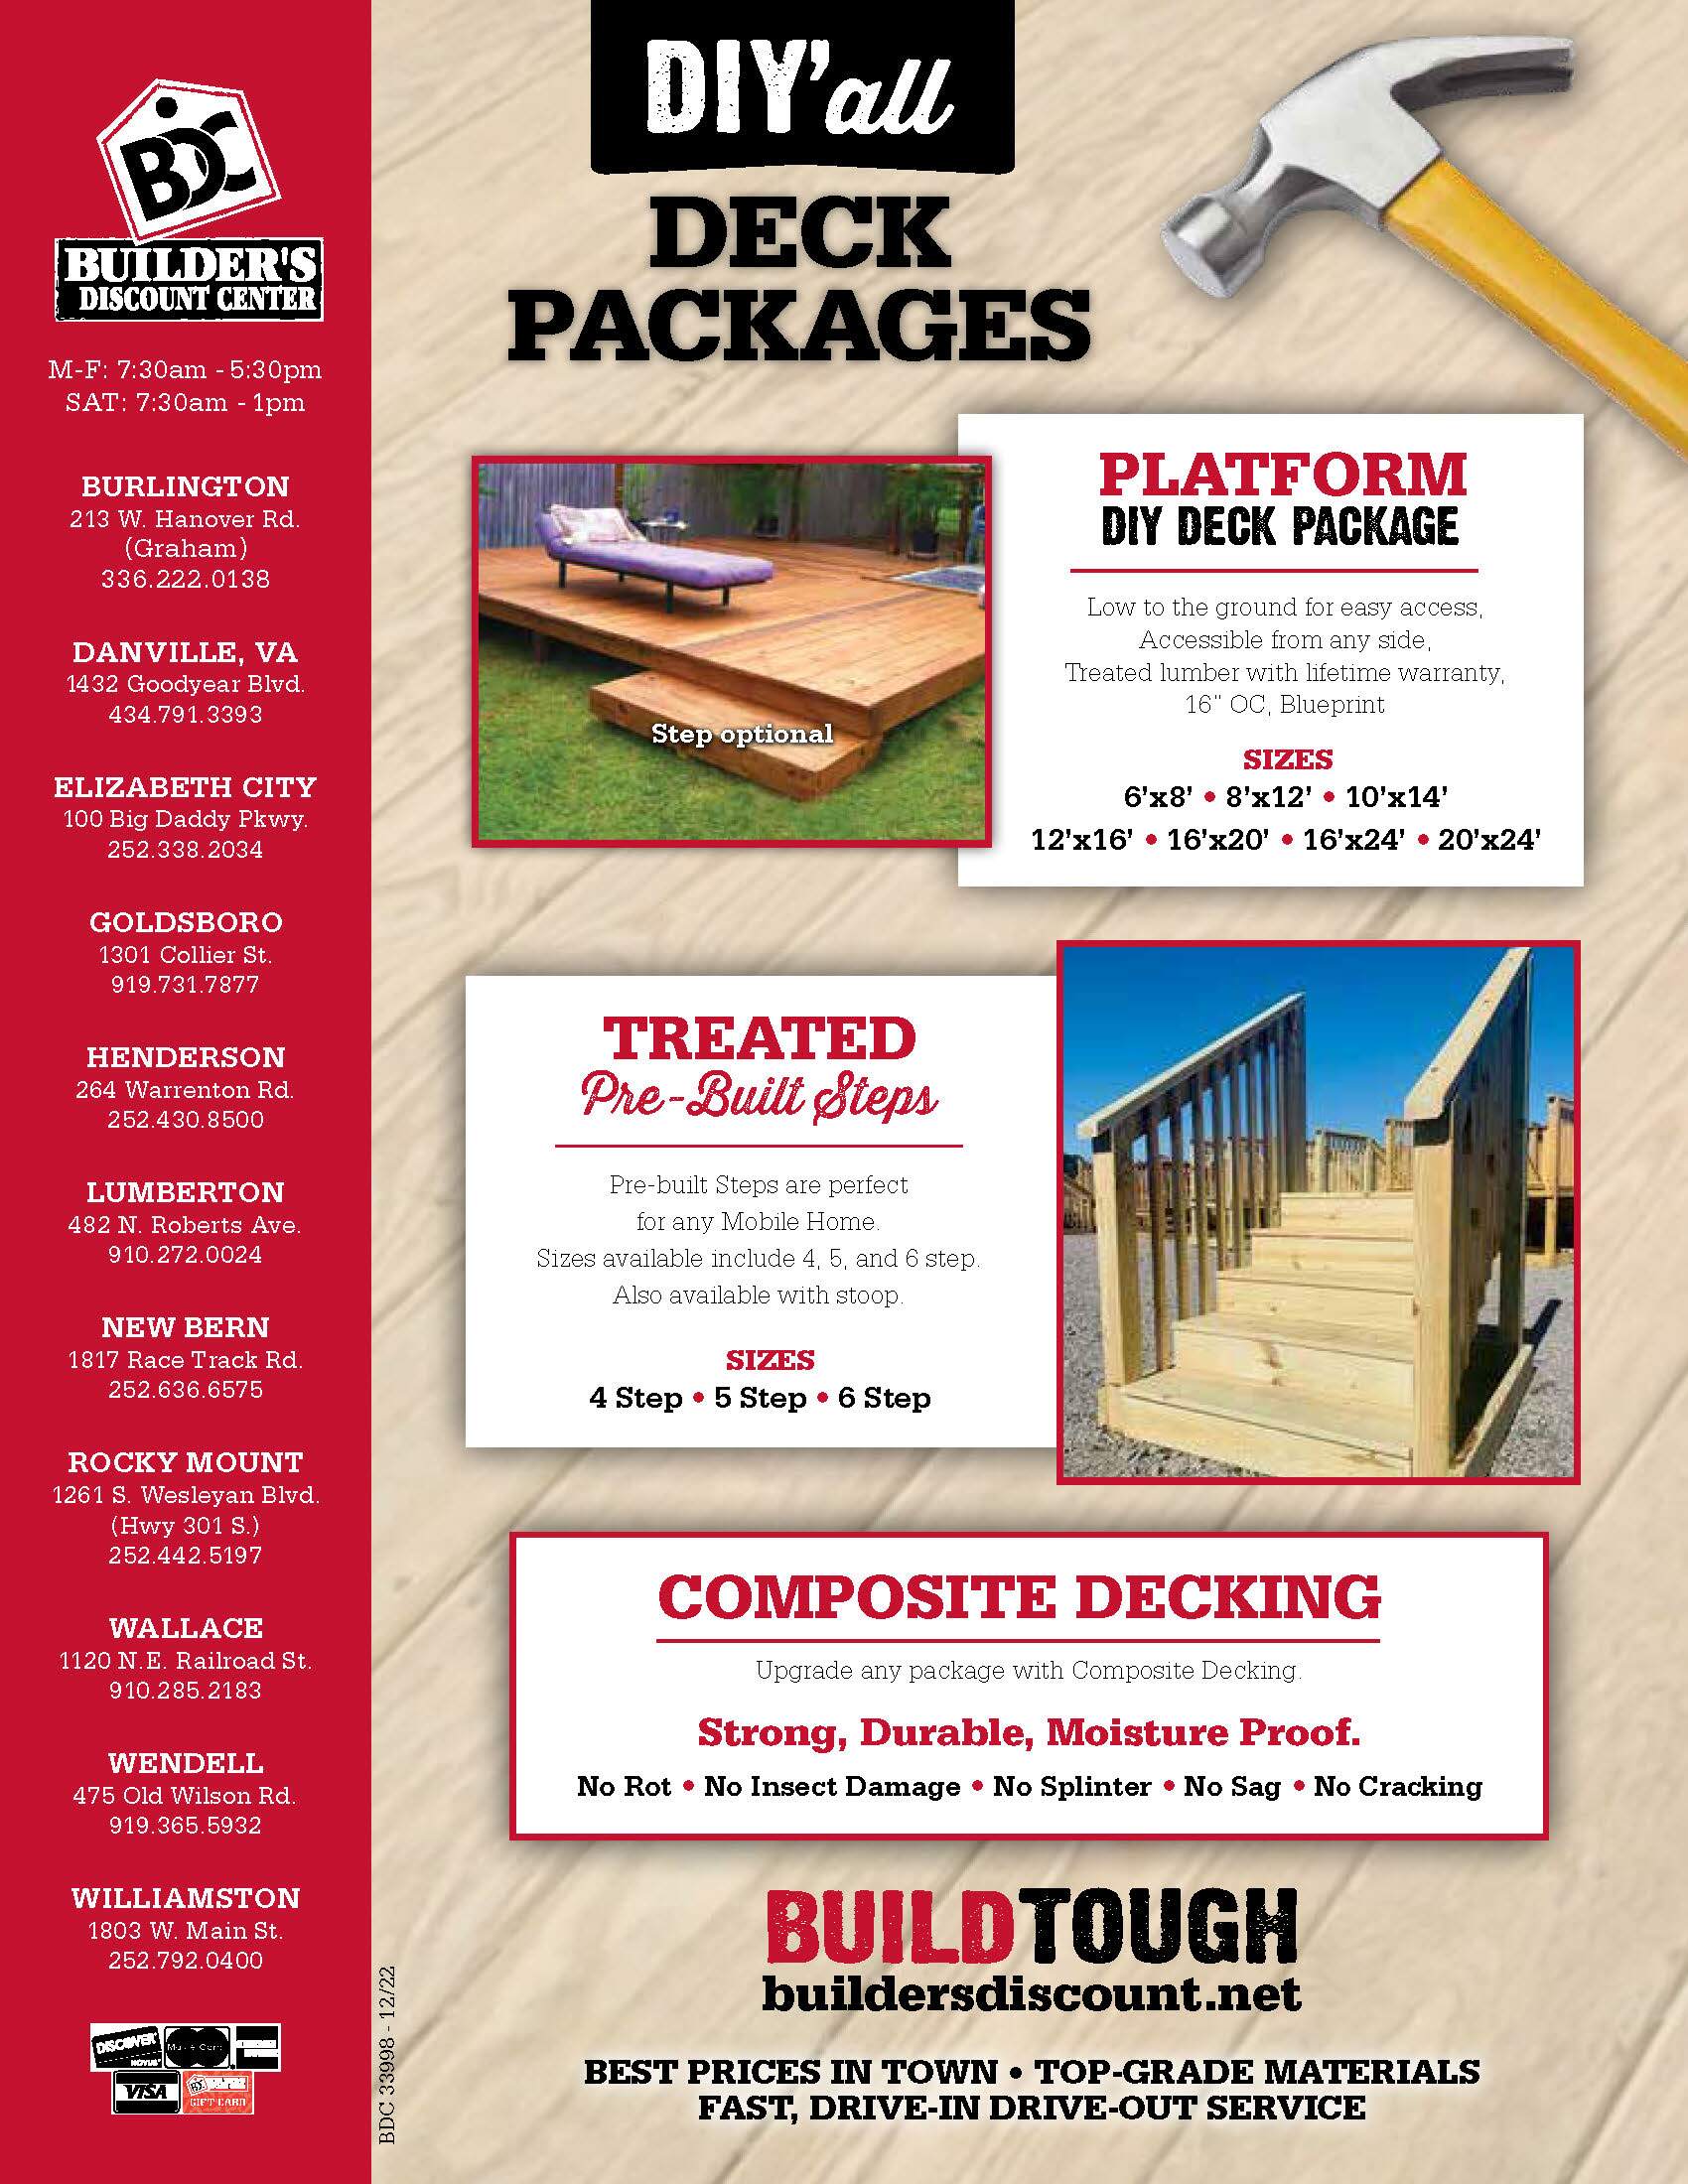 builders discount center deck packages flyer 2 one of a deck and one of lumber